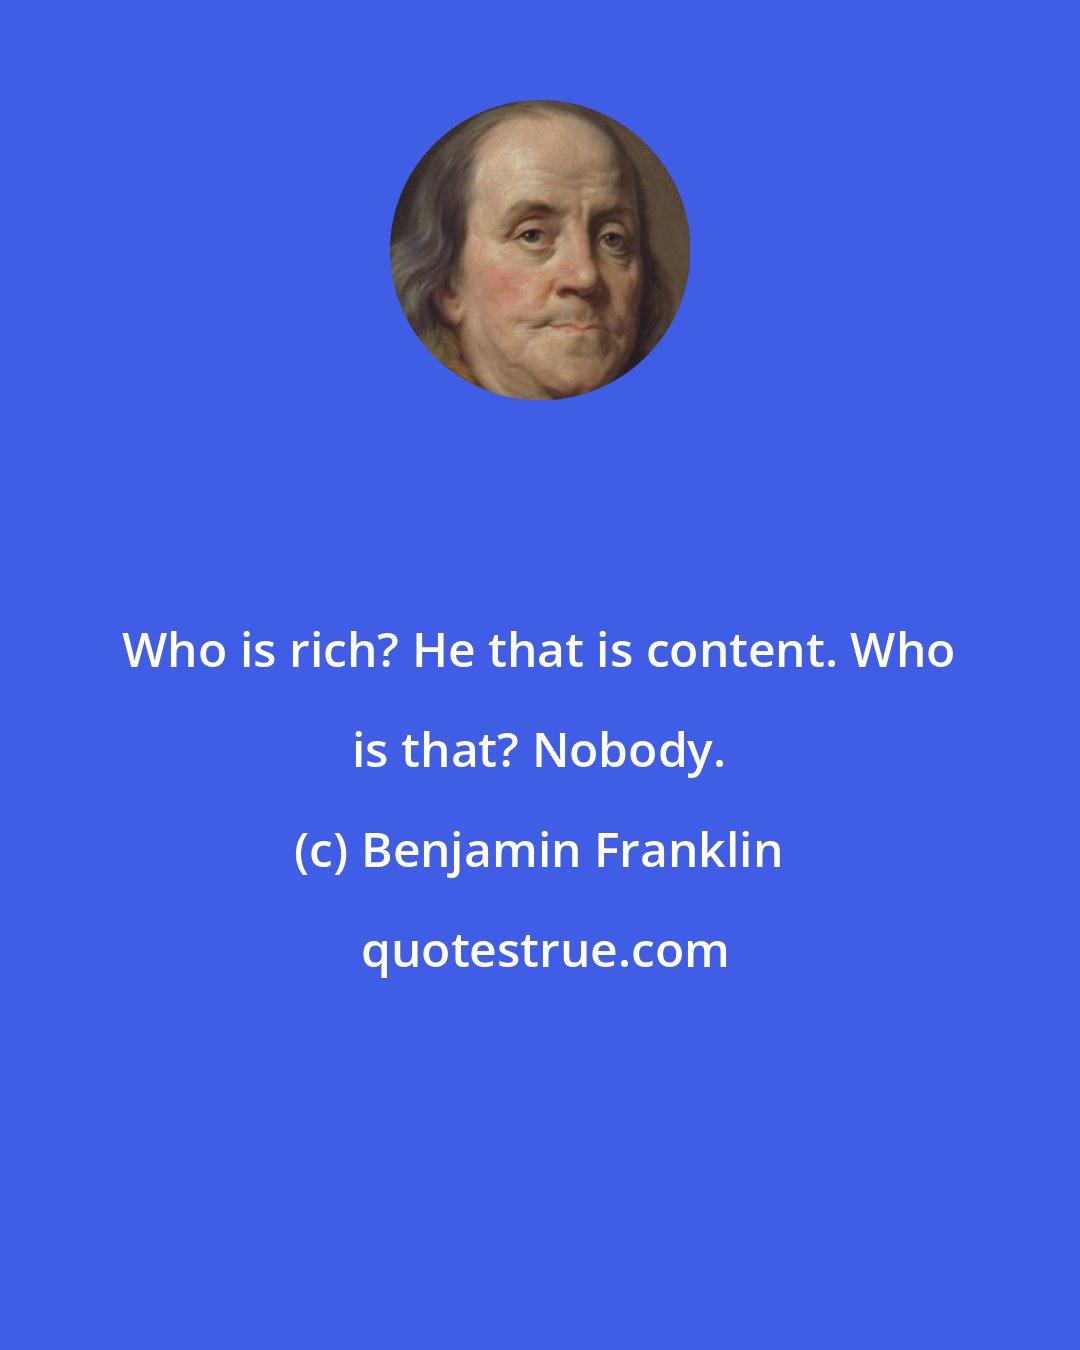 Benjamin Franklin: Who is rich? He that is content. Who is that? Nobody.